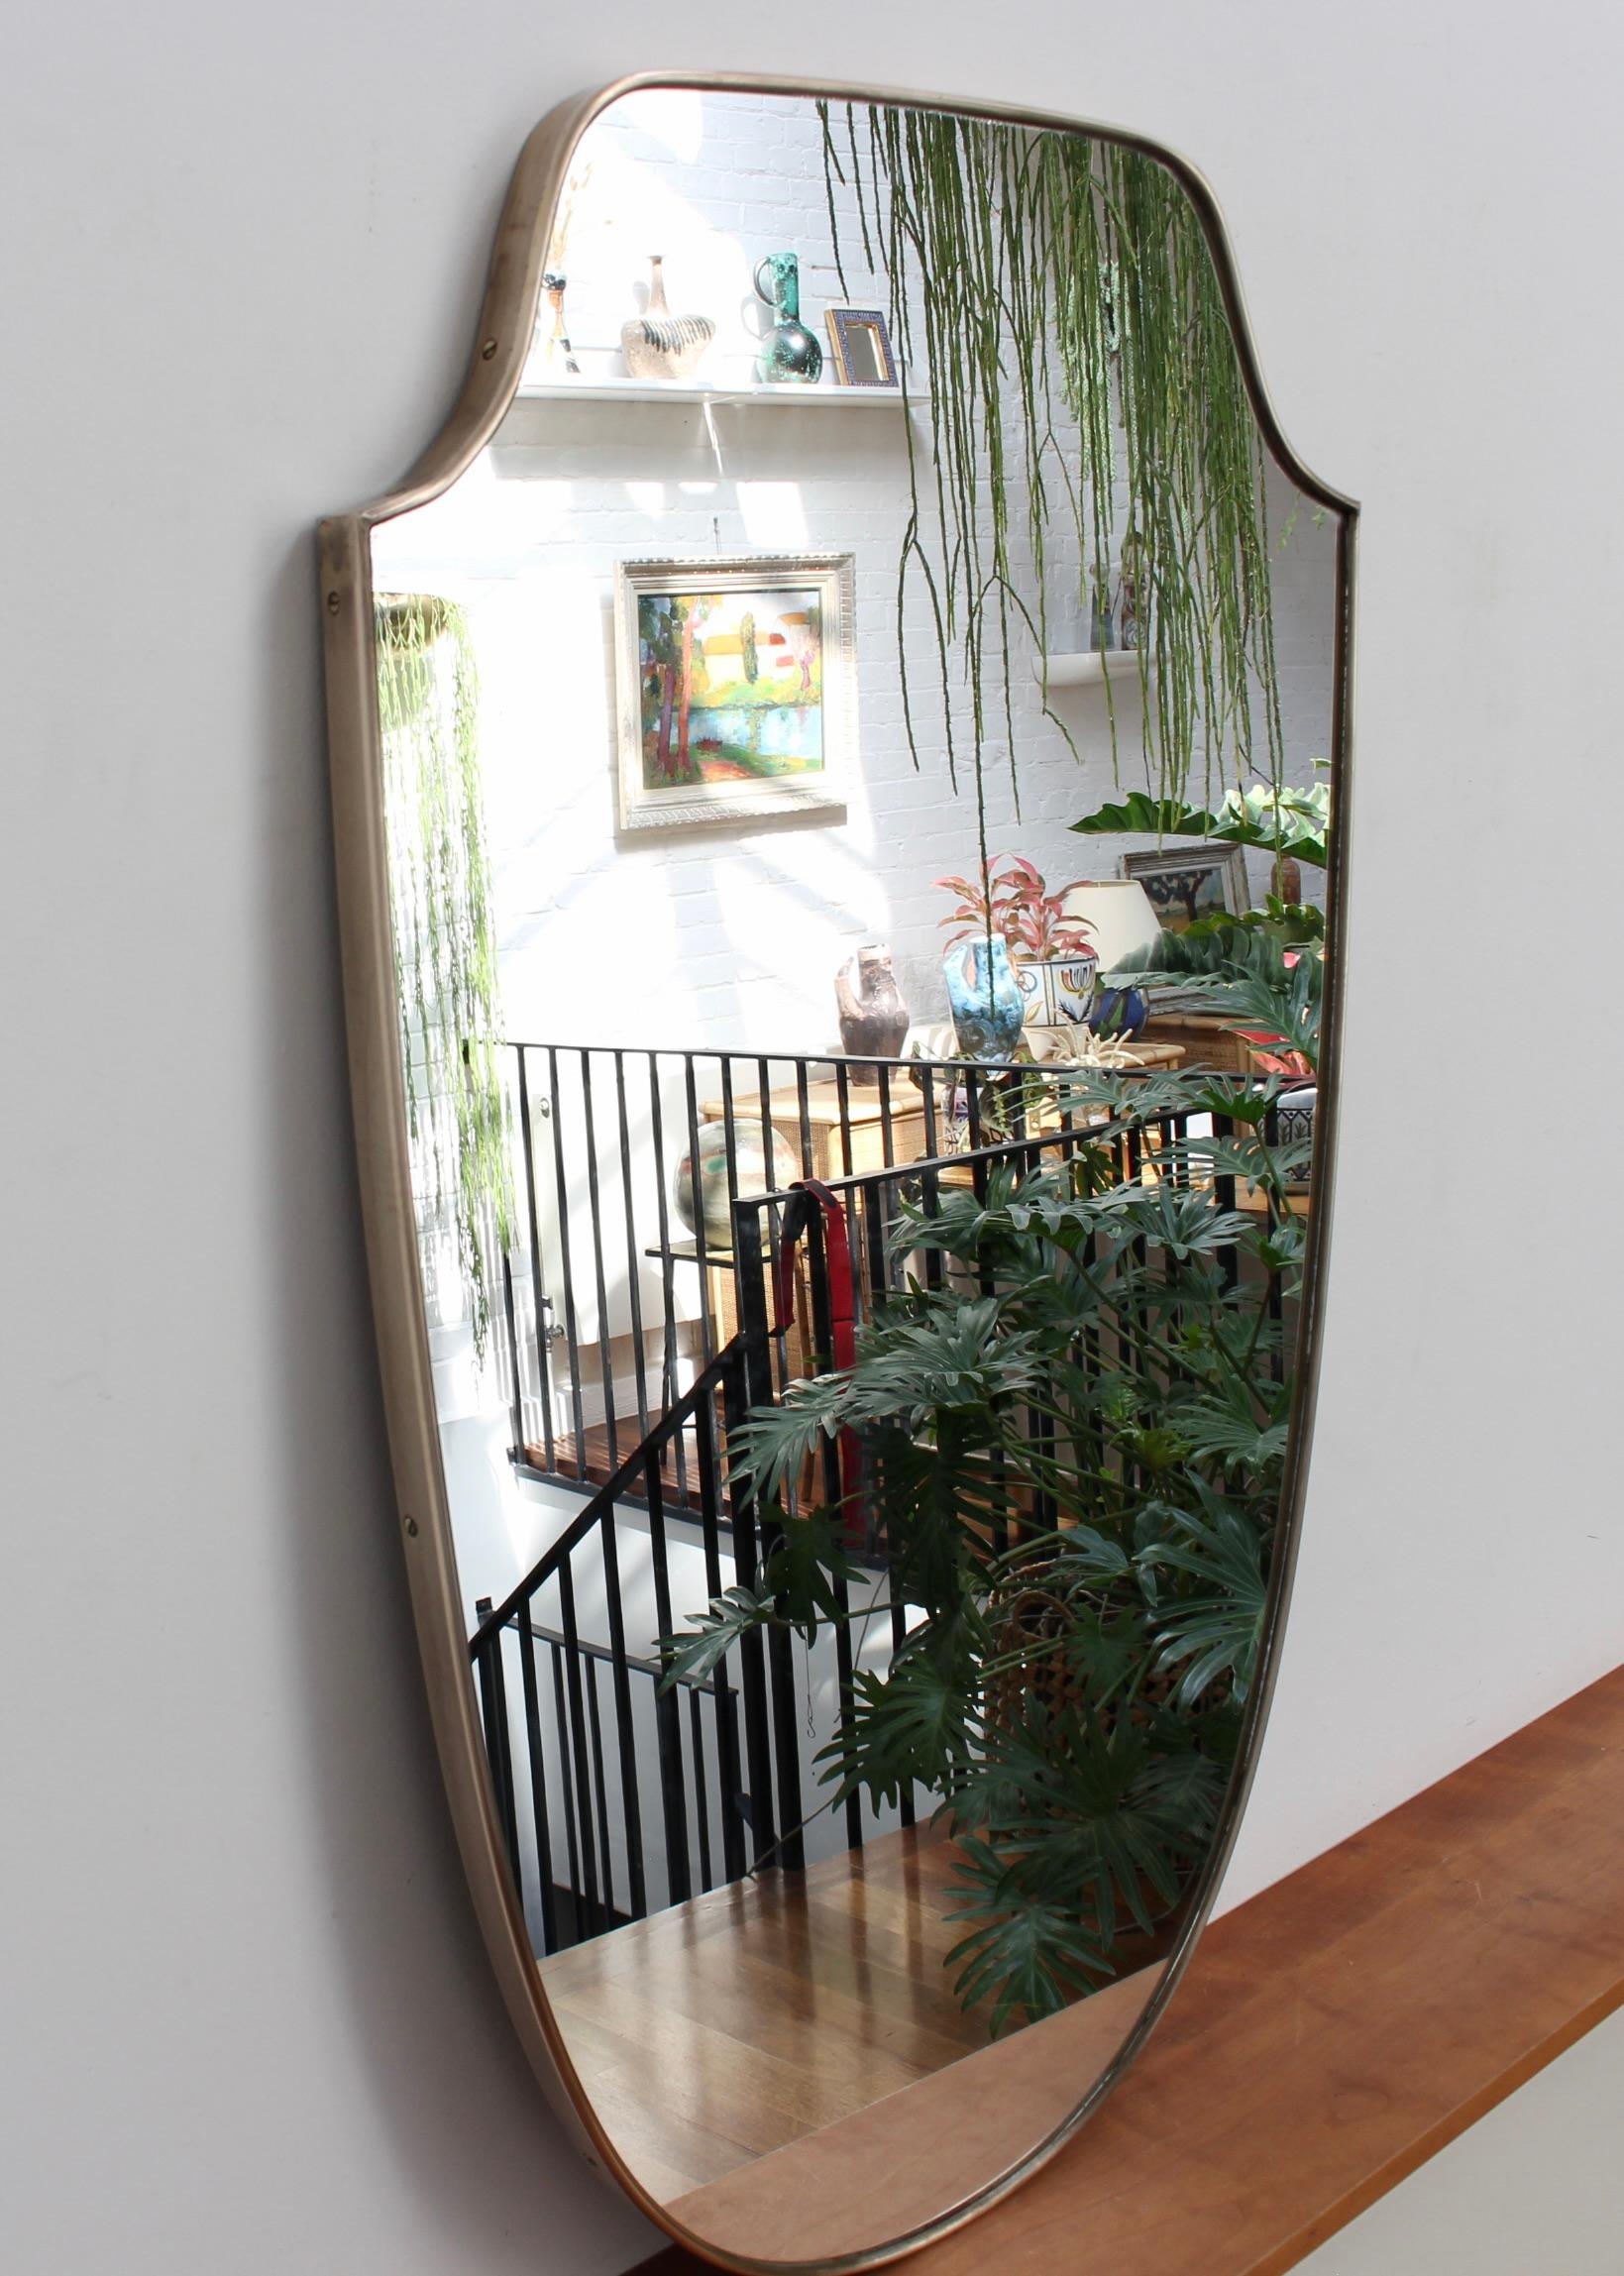 Midcentury Italian wall mirror with brass frame (circa 1950s). The large mirror is classically-shaped and distinctive in a Modern style. It is in good overall condition with two minor chips in the glass as seen in the accompanying photos. A